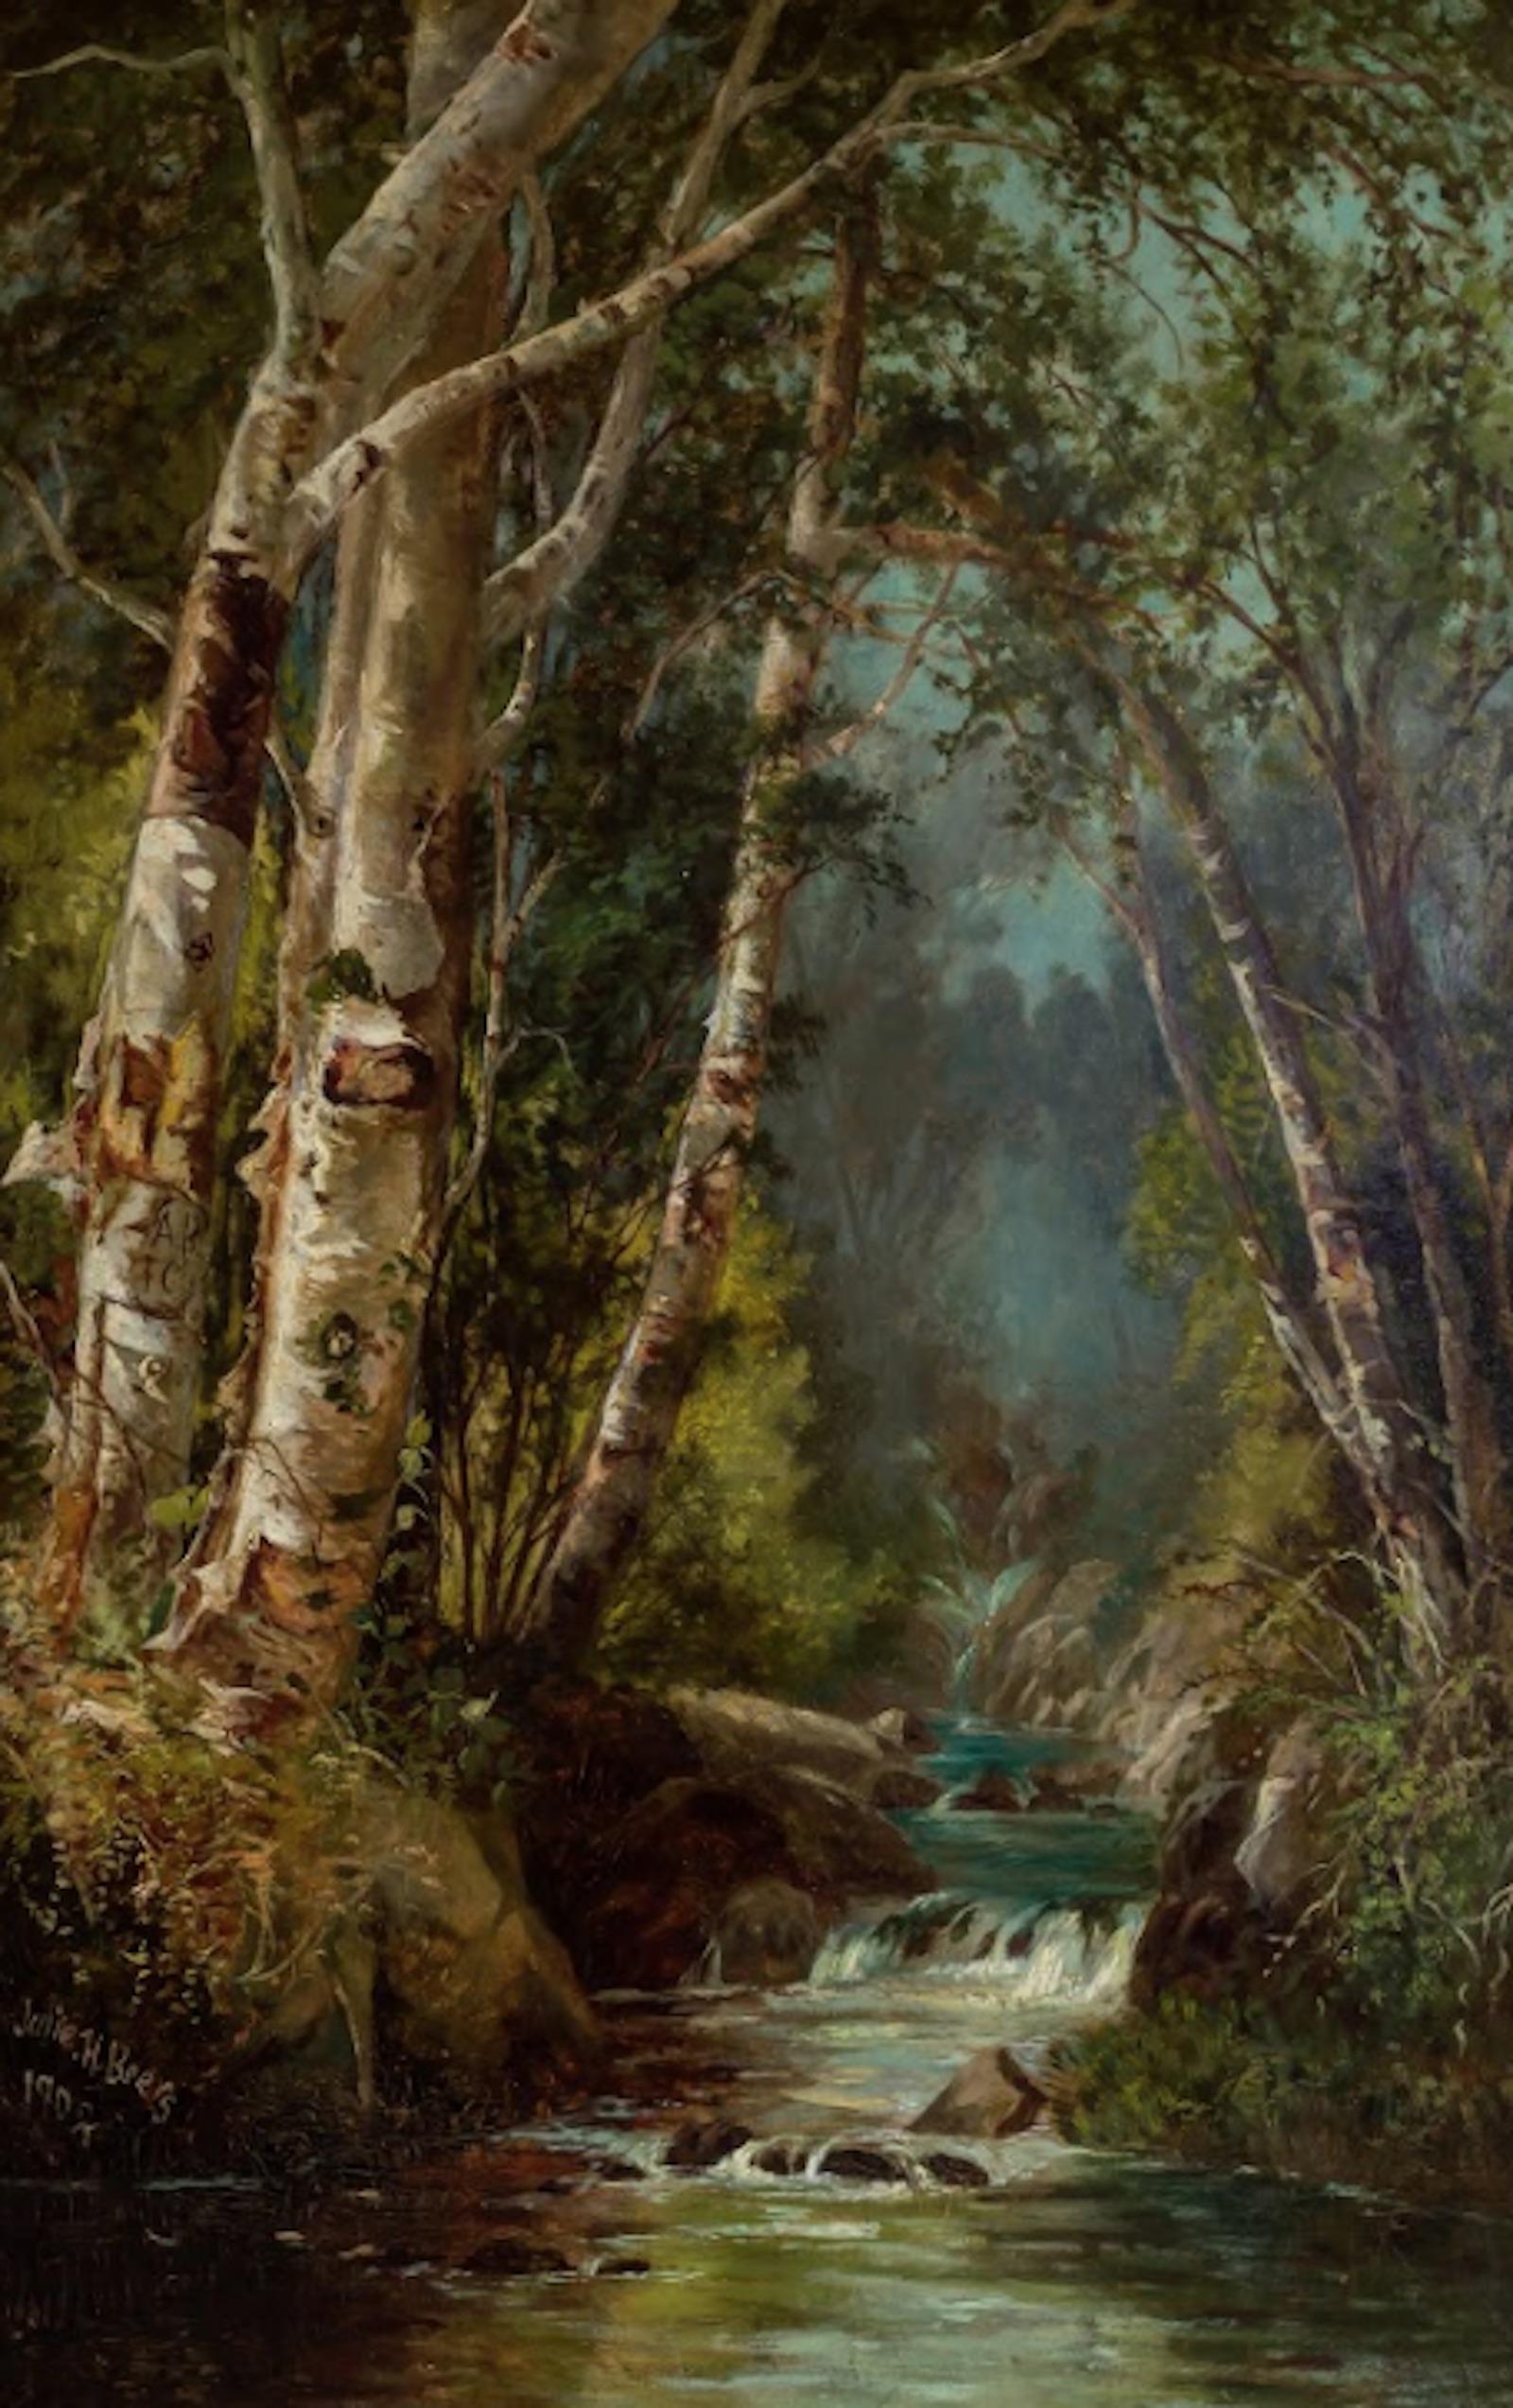 Julie Hart Beers, Birches by a Woodland Stream,1908. Oil on board. 26 1/2 in. x 16 3/4 in. (67.3 cm x 42.5 cm). Davis Museum at Wellesley College, Wellesley, MA.